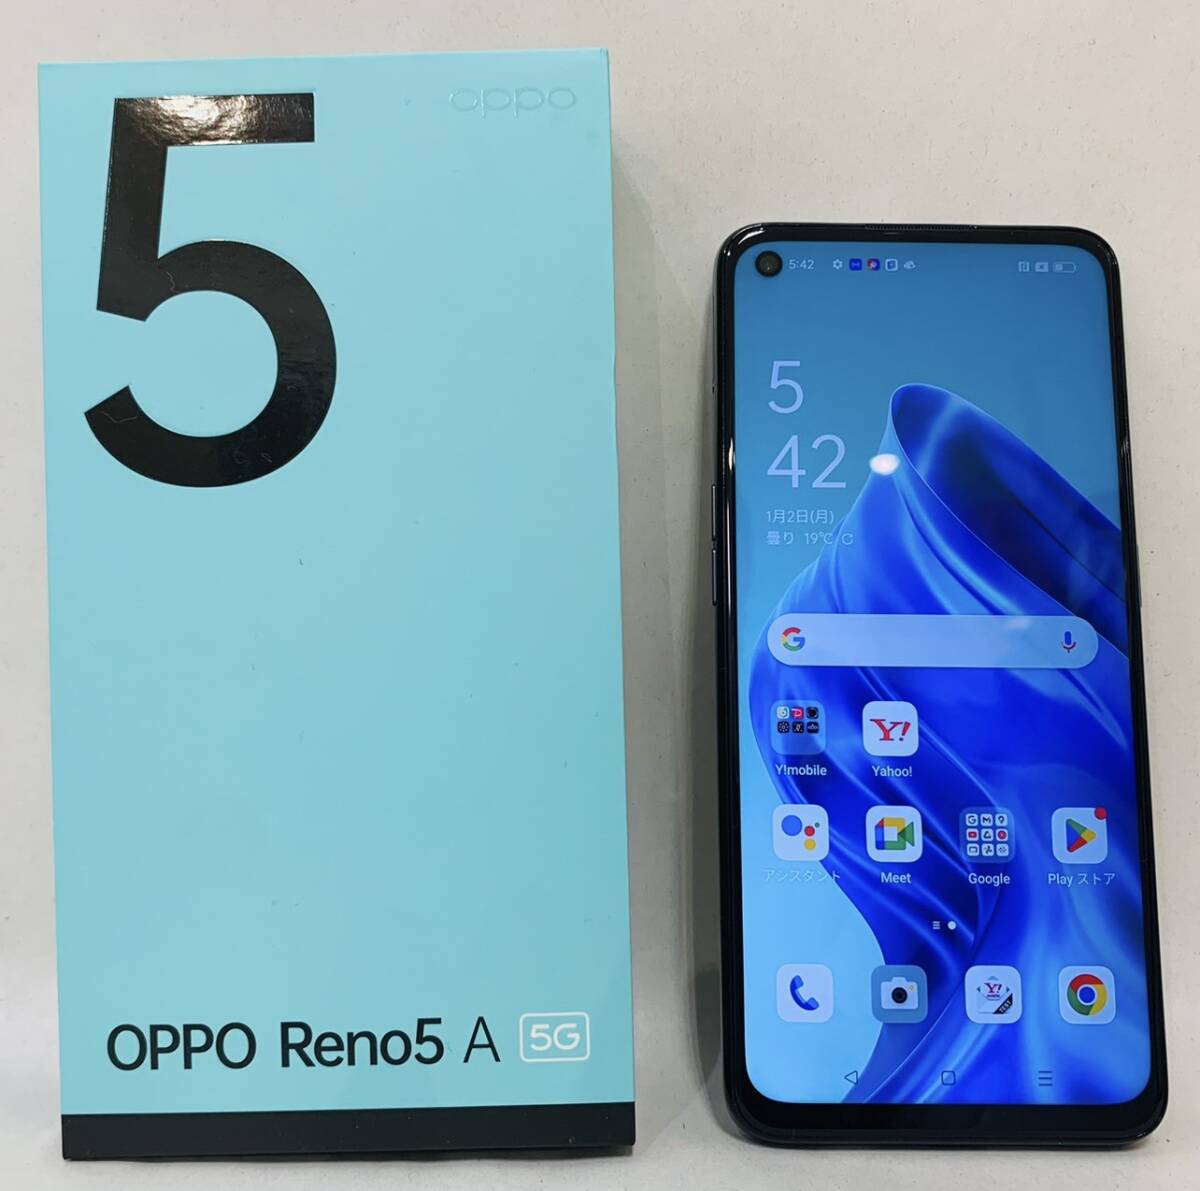 【MSO-5182IR】OPPO Reno5A A10OP 128GB ブラック IMEI:861372051067453 判定〇 箱あり 中古品 付属品なし スマホ androidの画像1